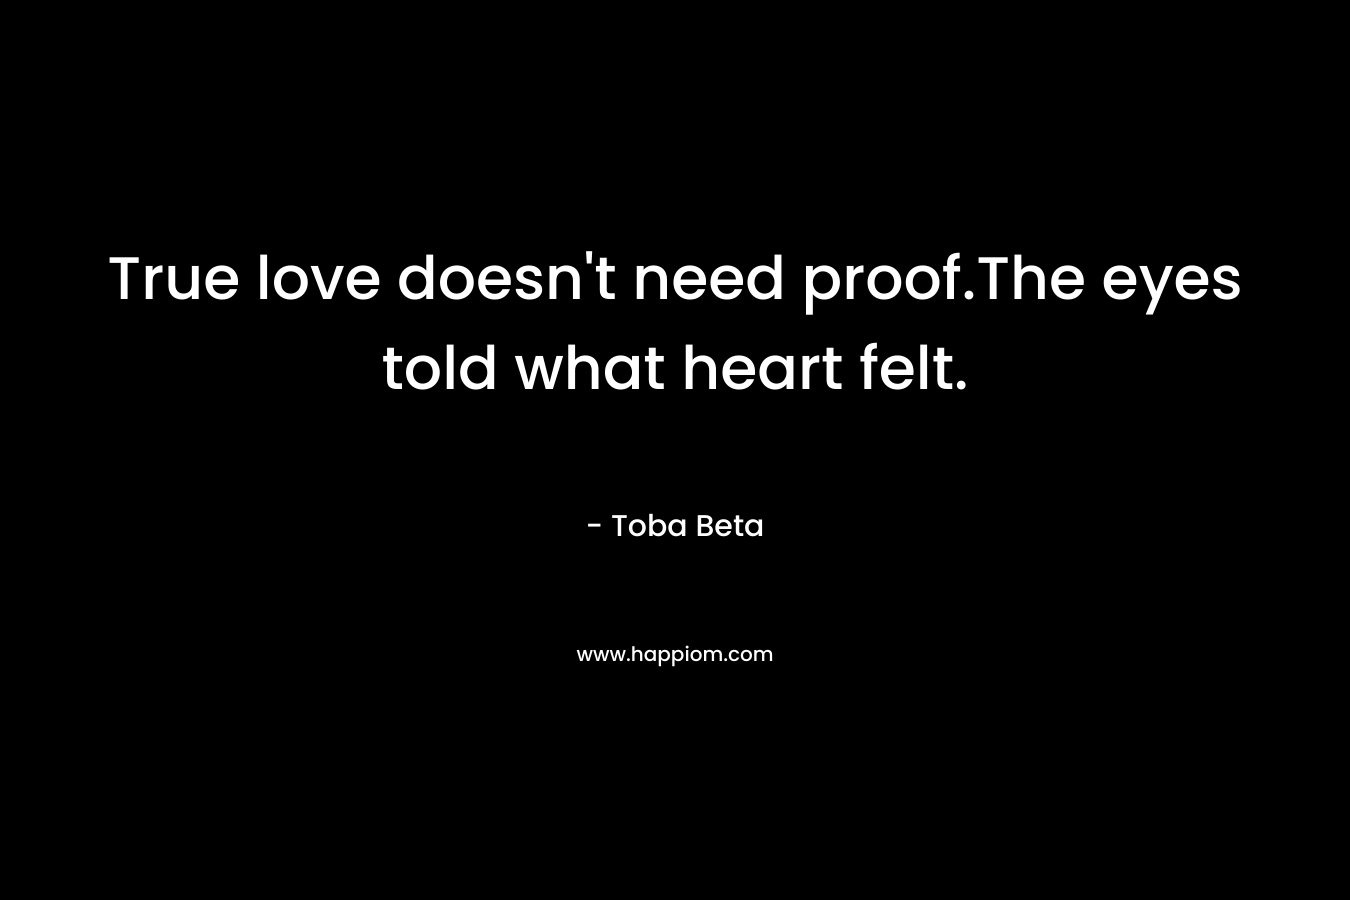 True love doesn't need proof.The eyes told what heart felt.